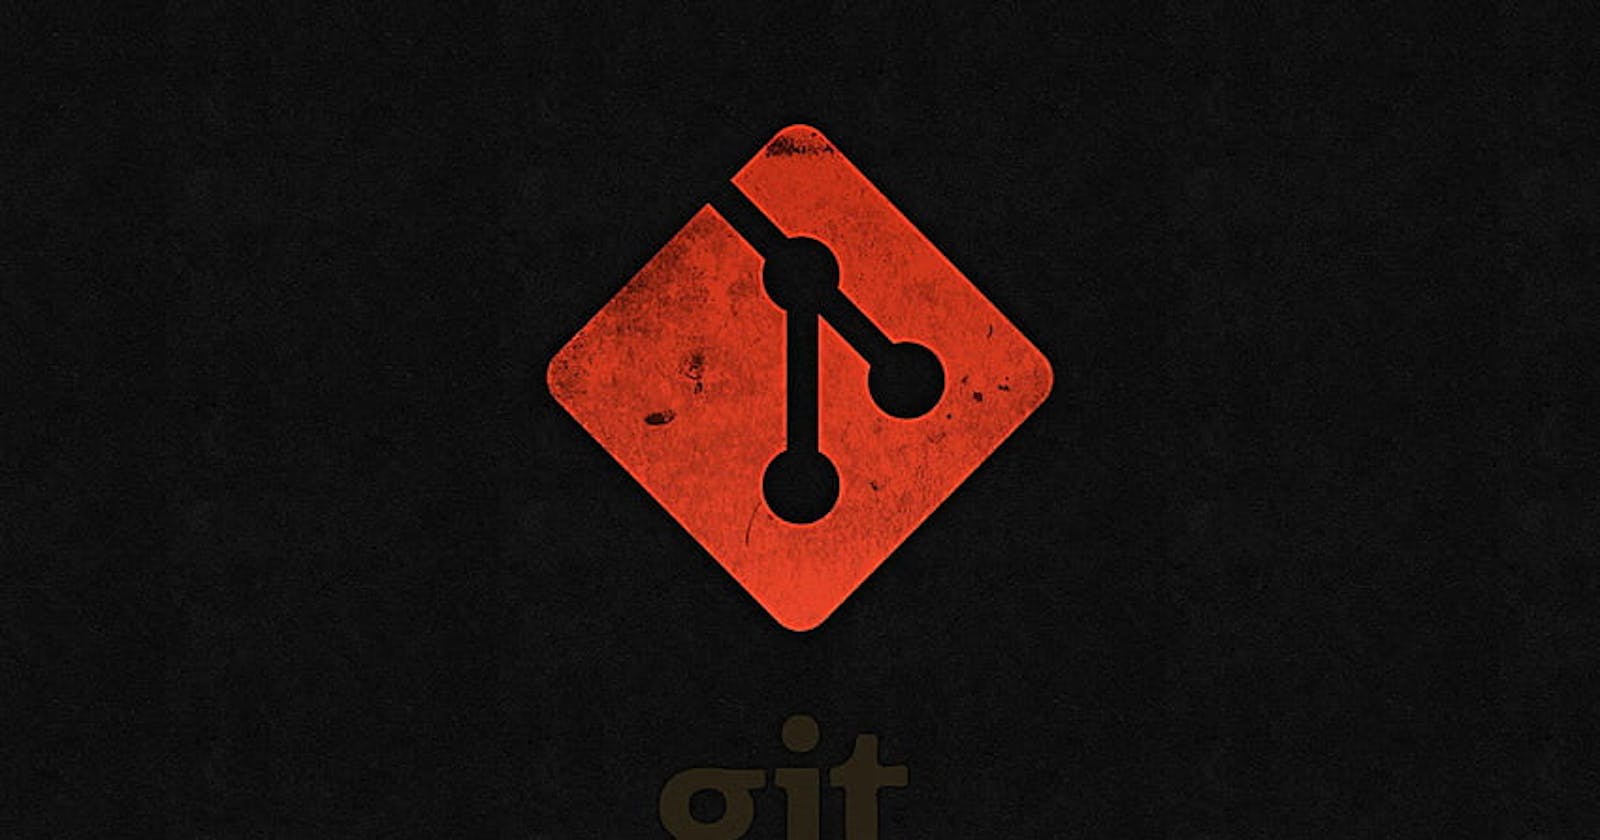 All About Git Commands